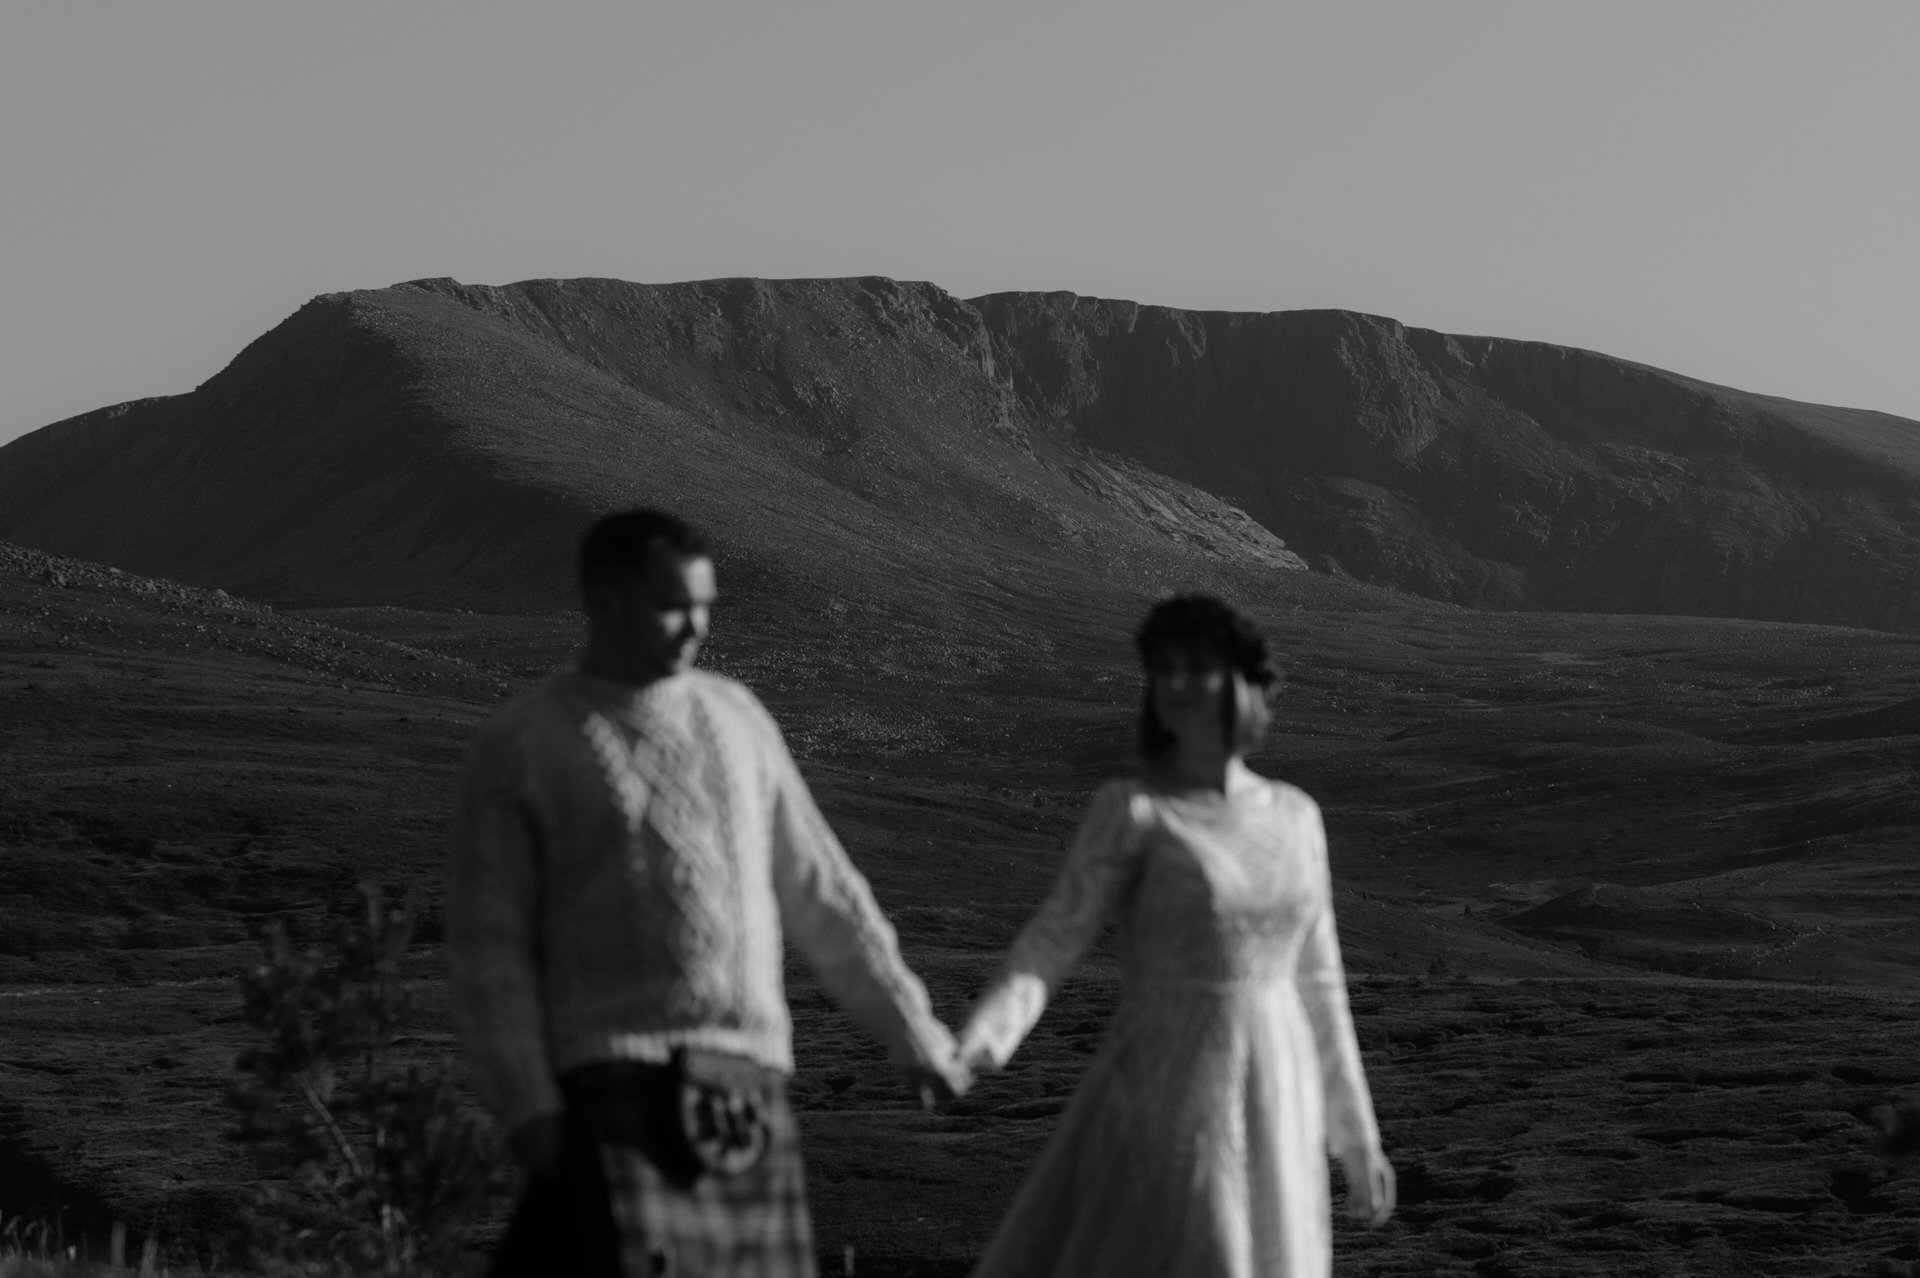 Sunshine on the Cairngorm mountains in Scotland with Bride and Groom walking, running, hugging and laughing in the foreground